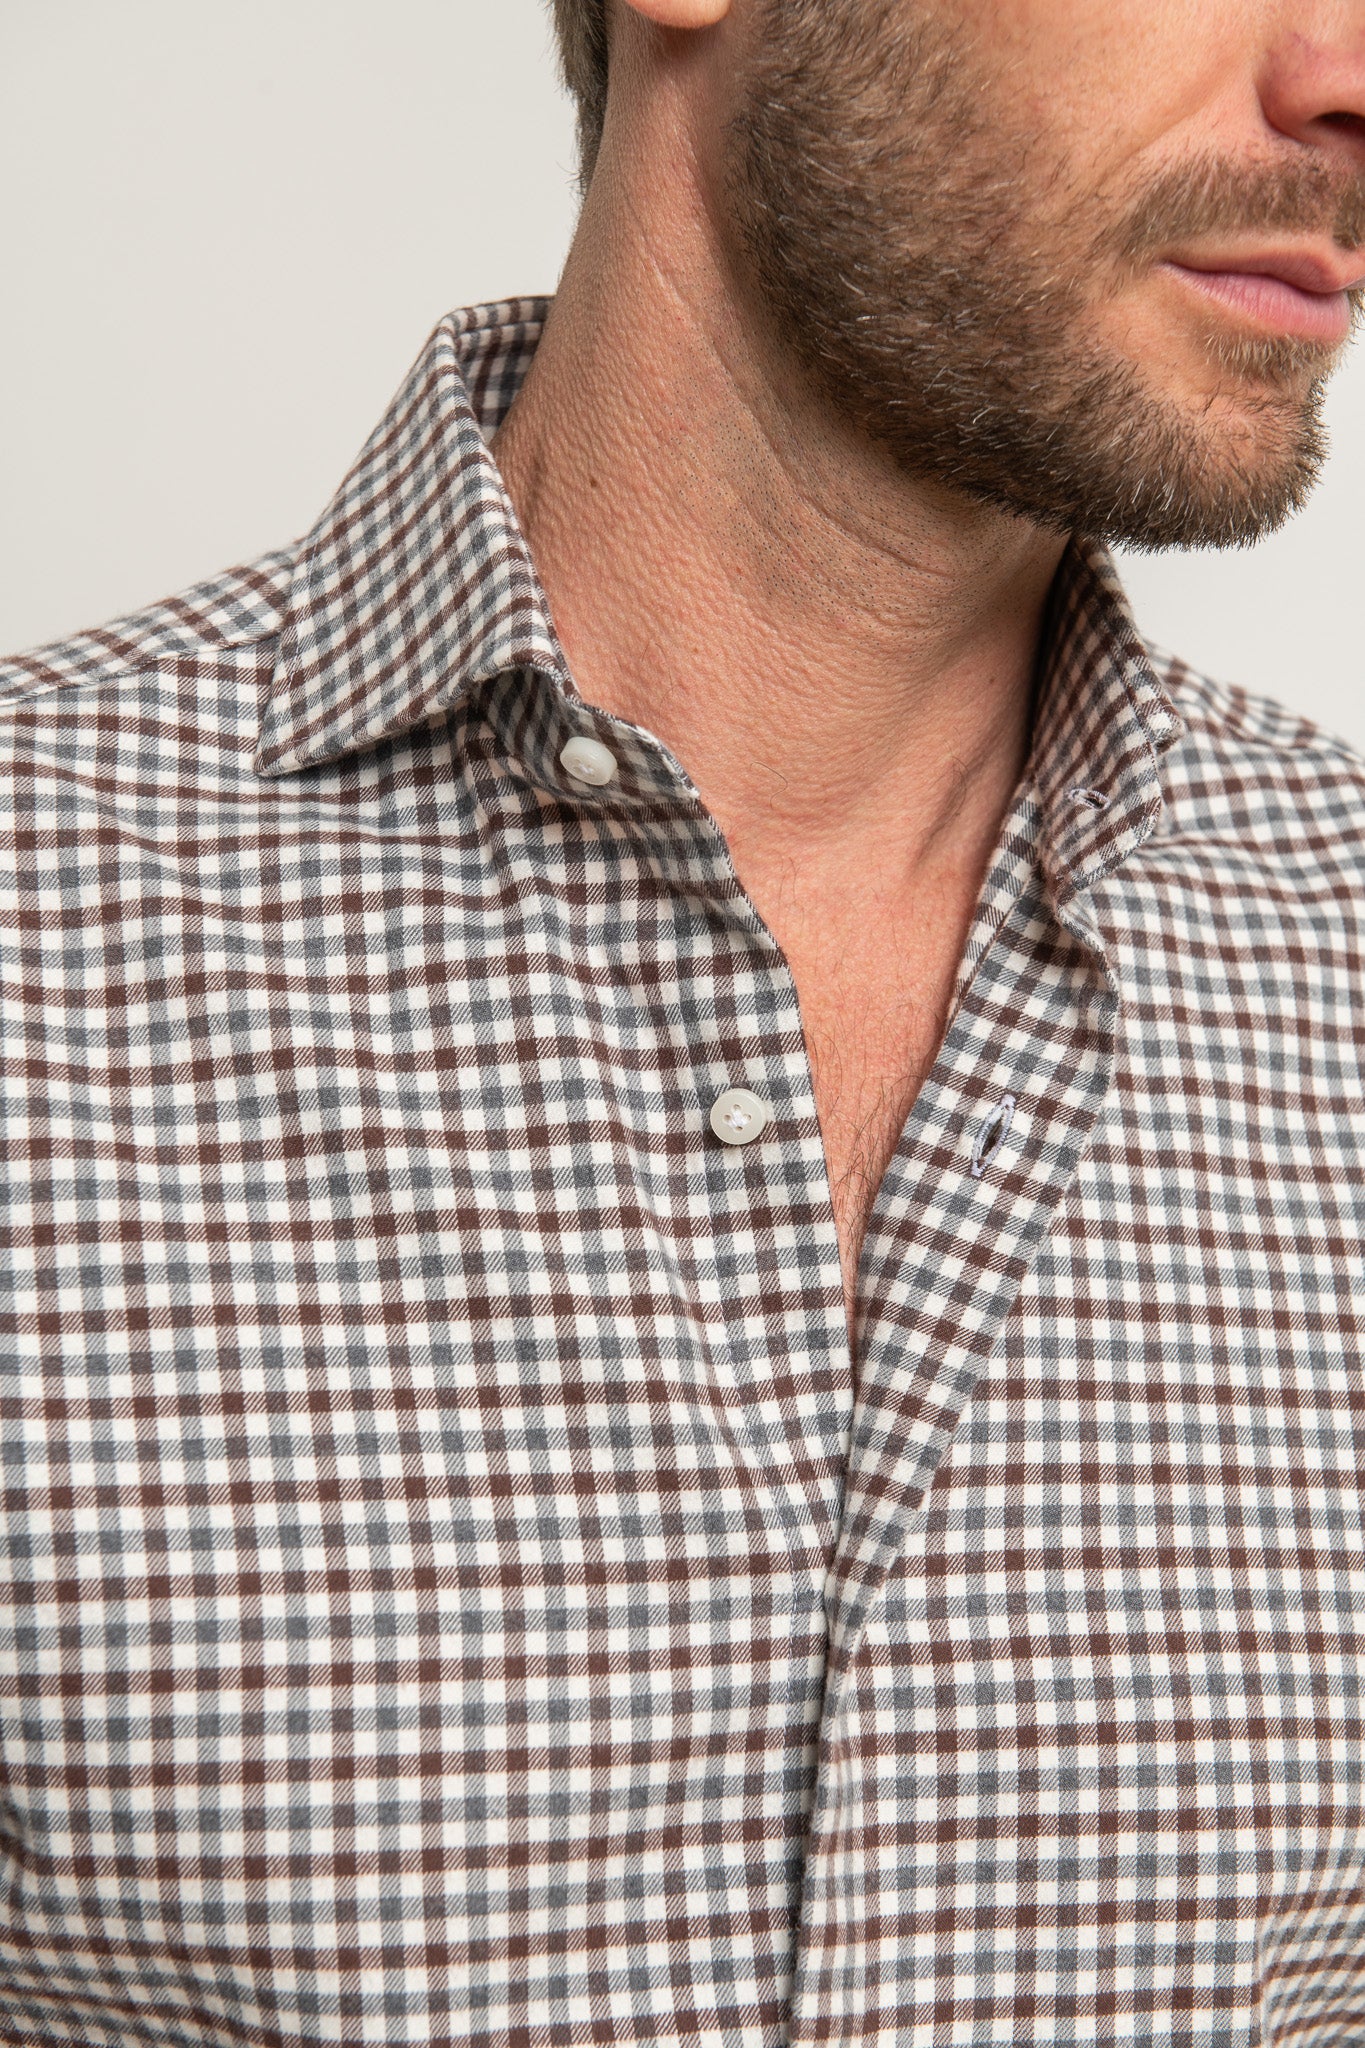 Brown and grey vichy shirt - Made in Italy